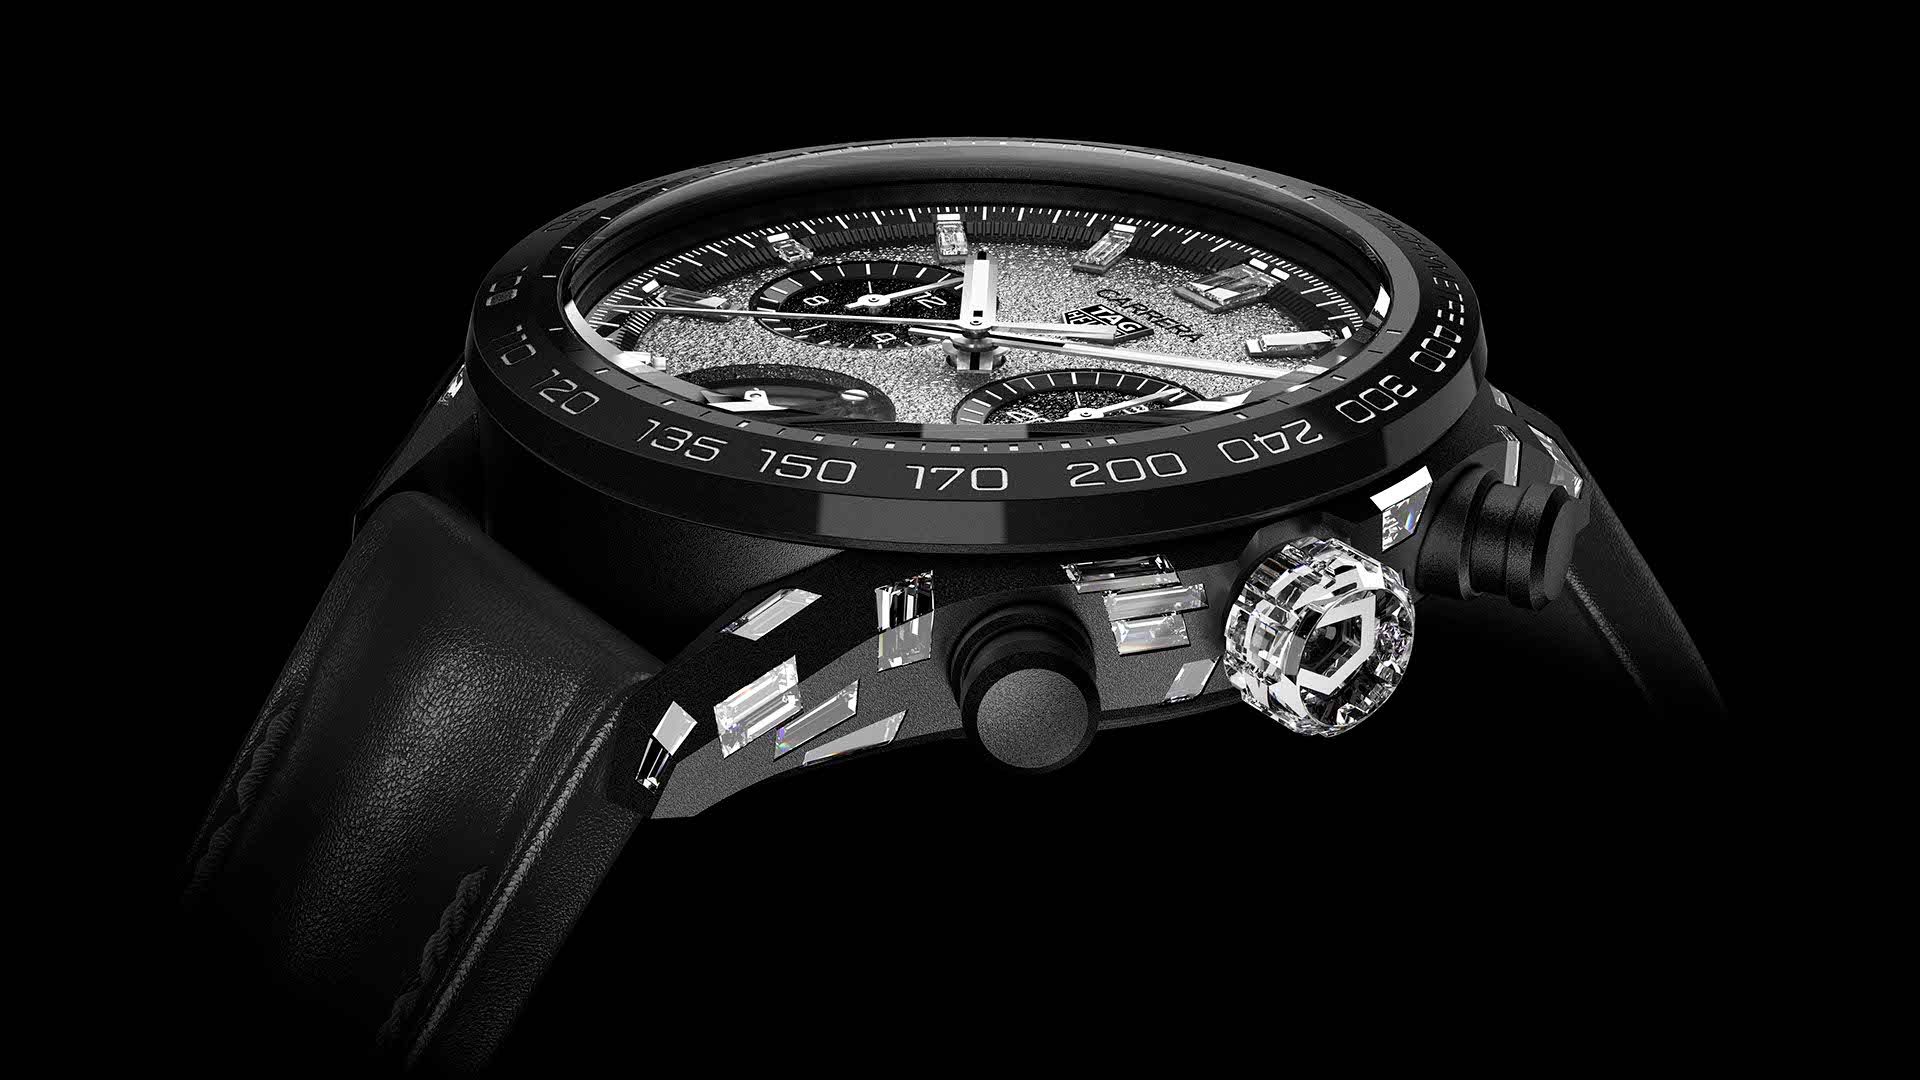 TAG Heuer's Carrera Plasma is enriched with lab-grown diamonds